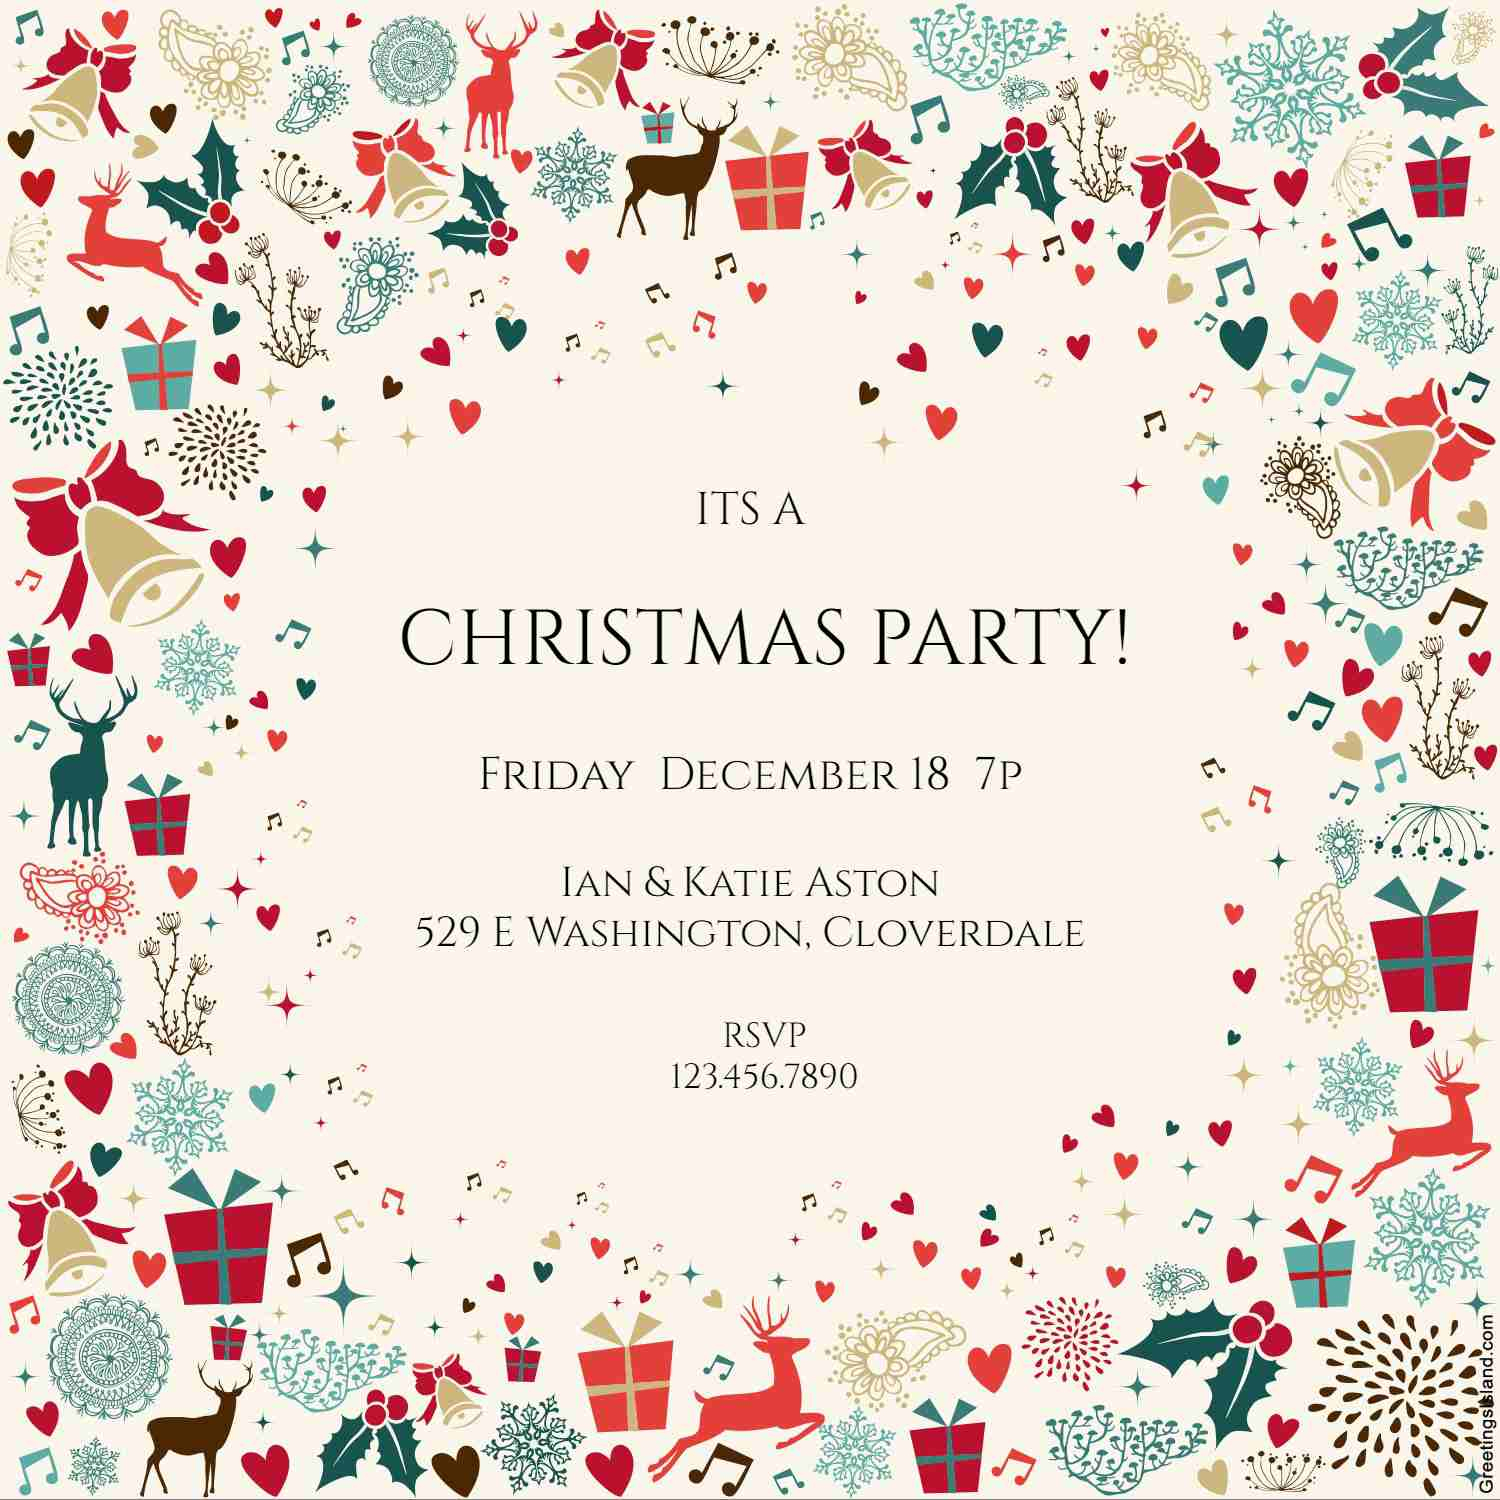 10 Free Christmas Party Invitations That You Can Print - Free Printable Christmas Party Flyer Templates